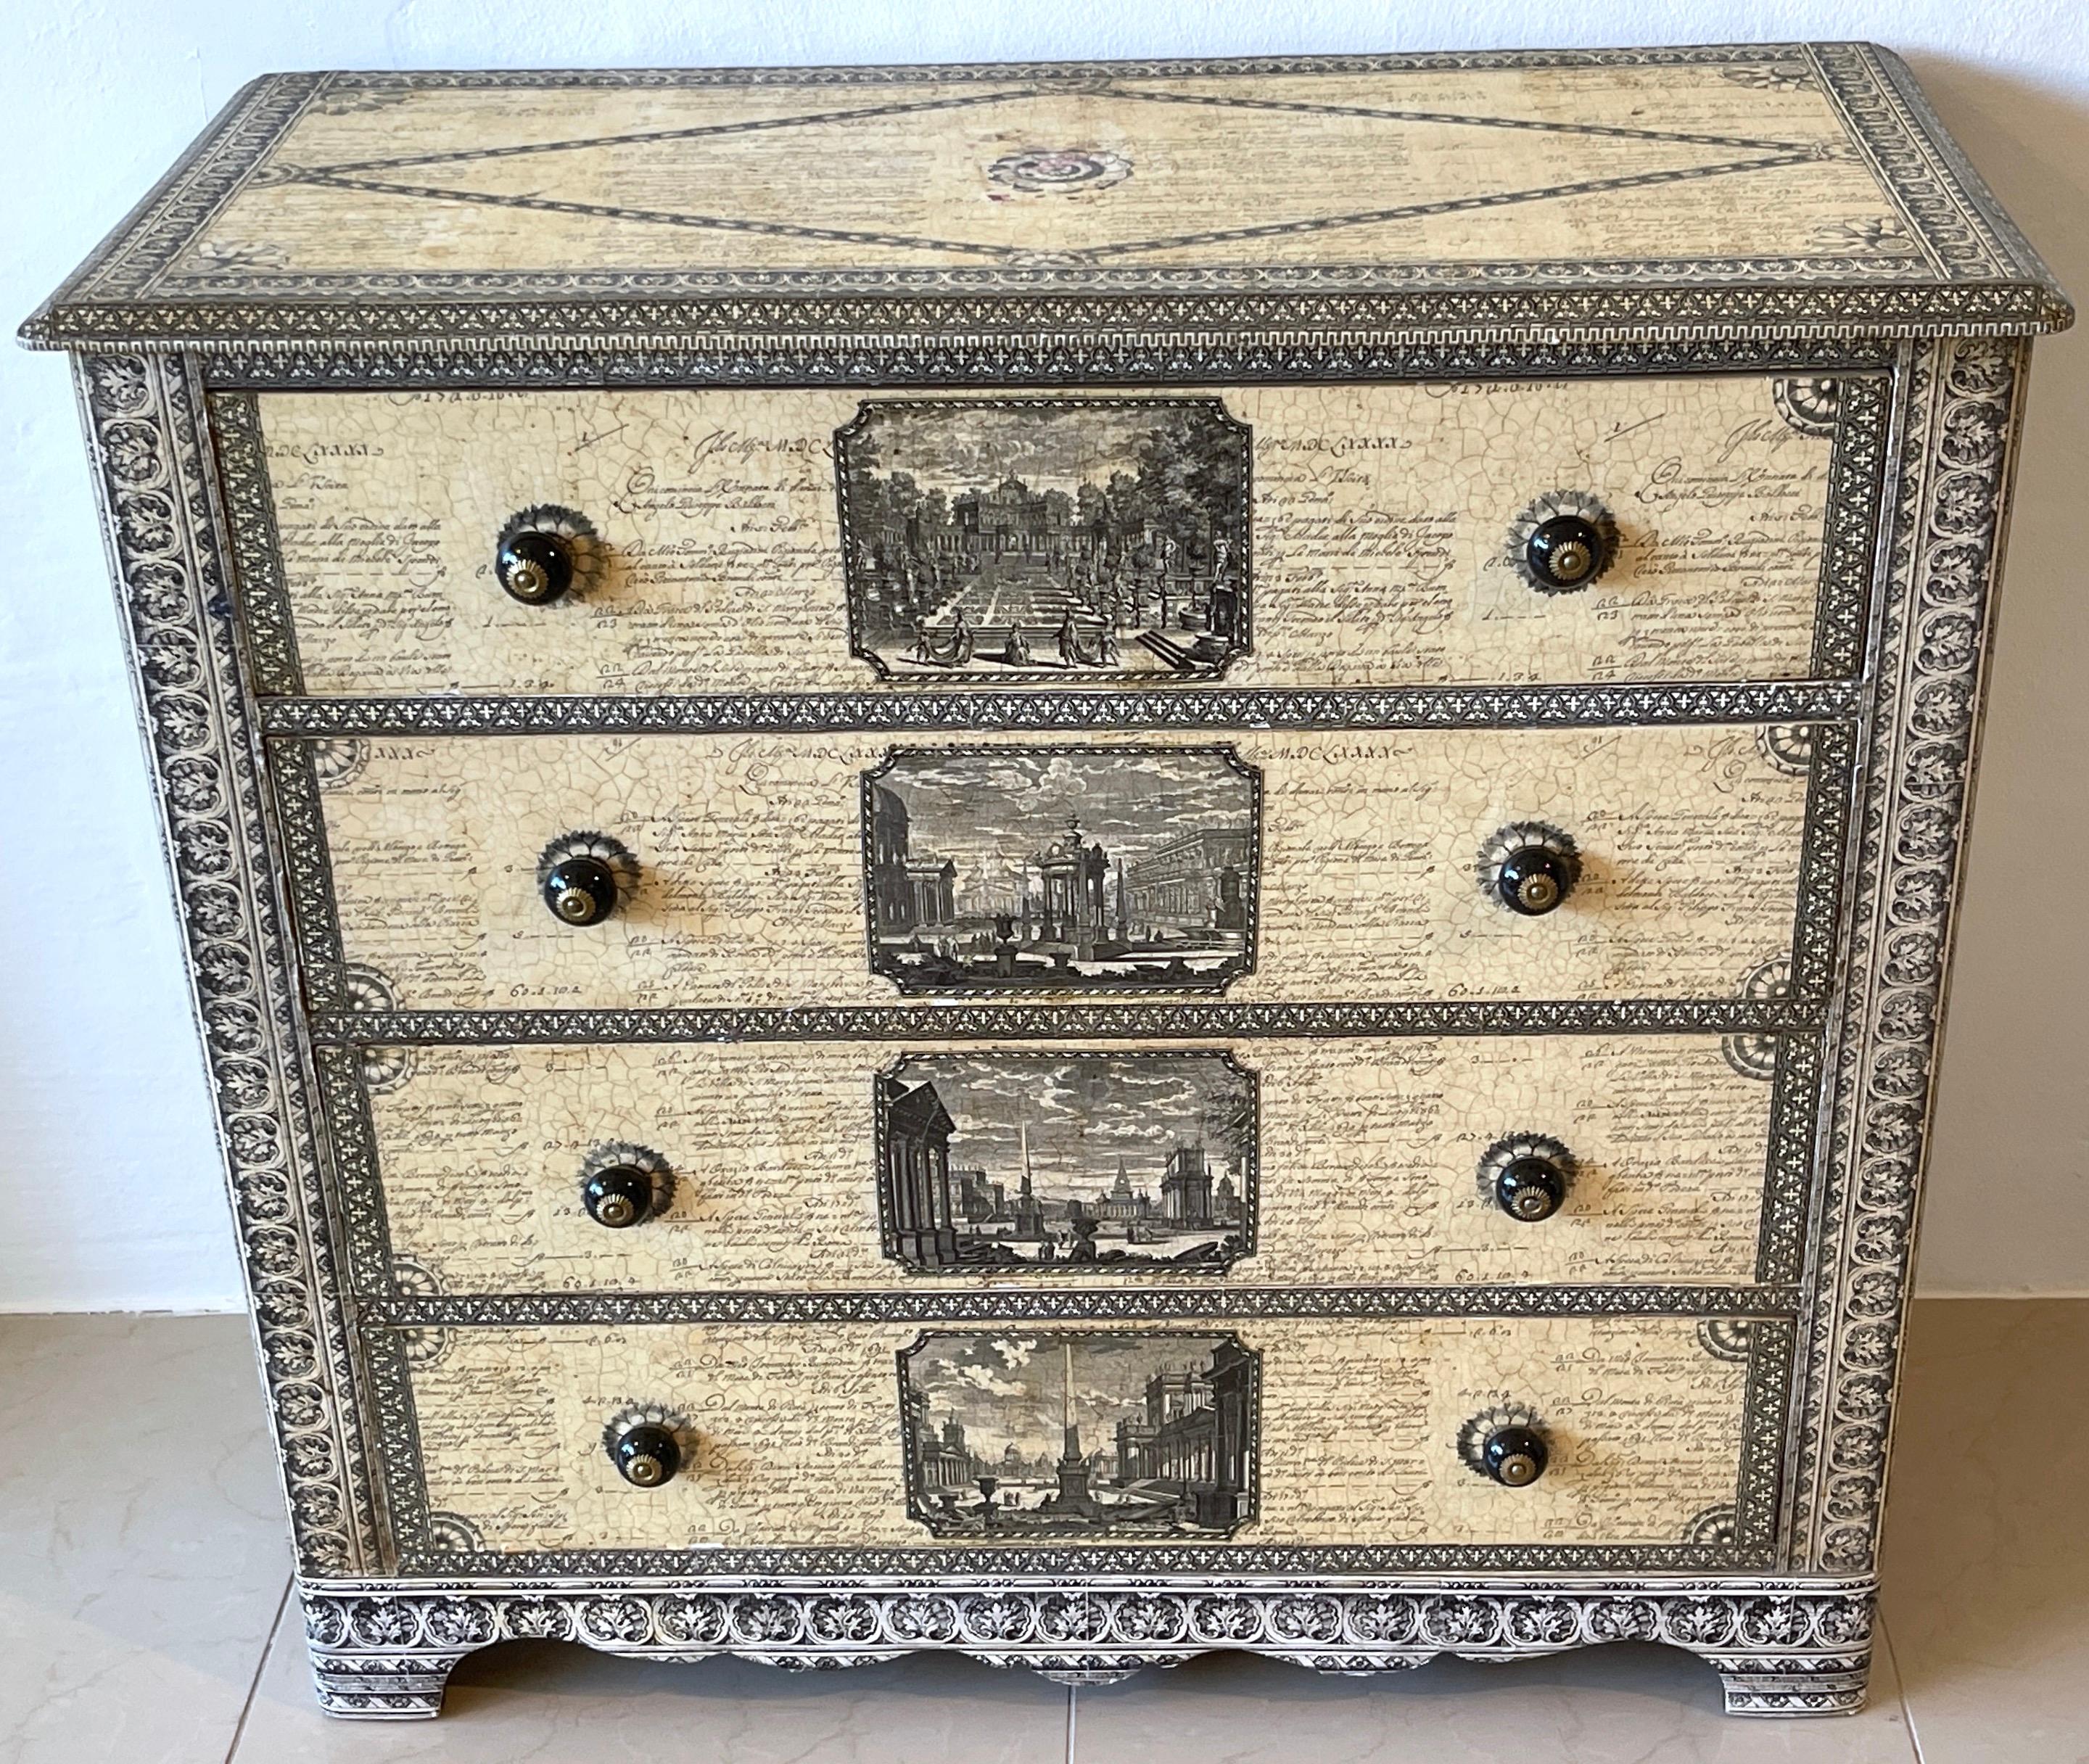 19th Century English Parchment Piranesi Style Decoupage Chest of Drawers 
The chest English, 19th Century, the Applied  'Piranesi' Decoupage added 20th C

A subtle and intricate work with all over applied Neo -Classical views in the style Piranesi.